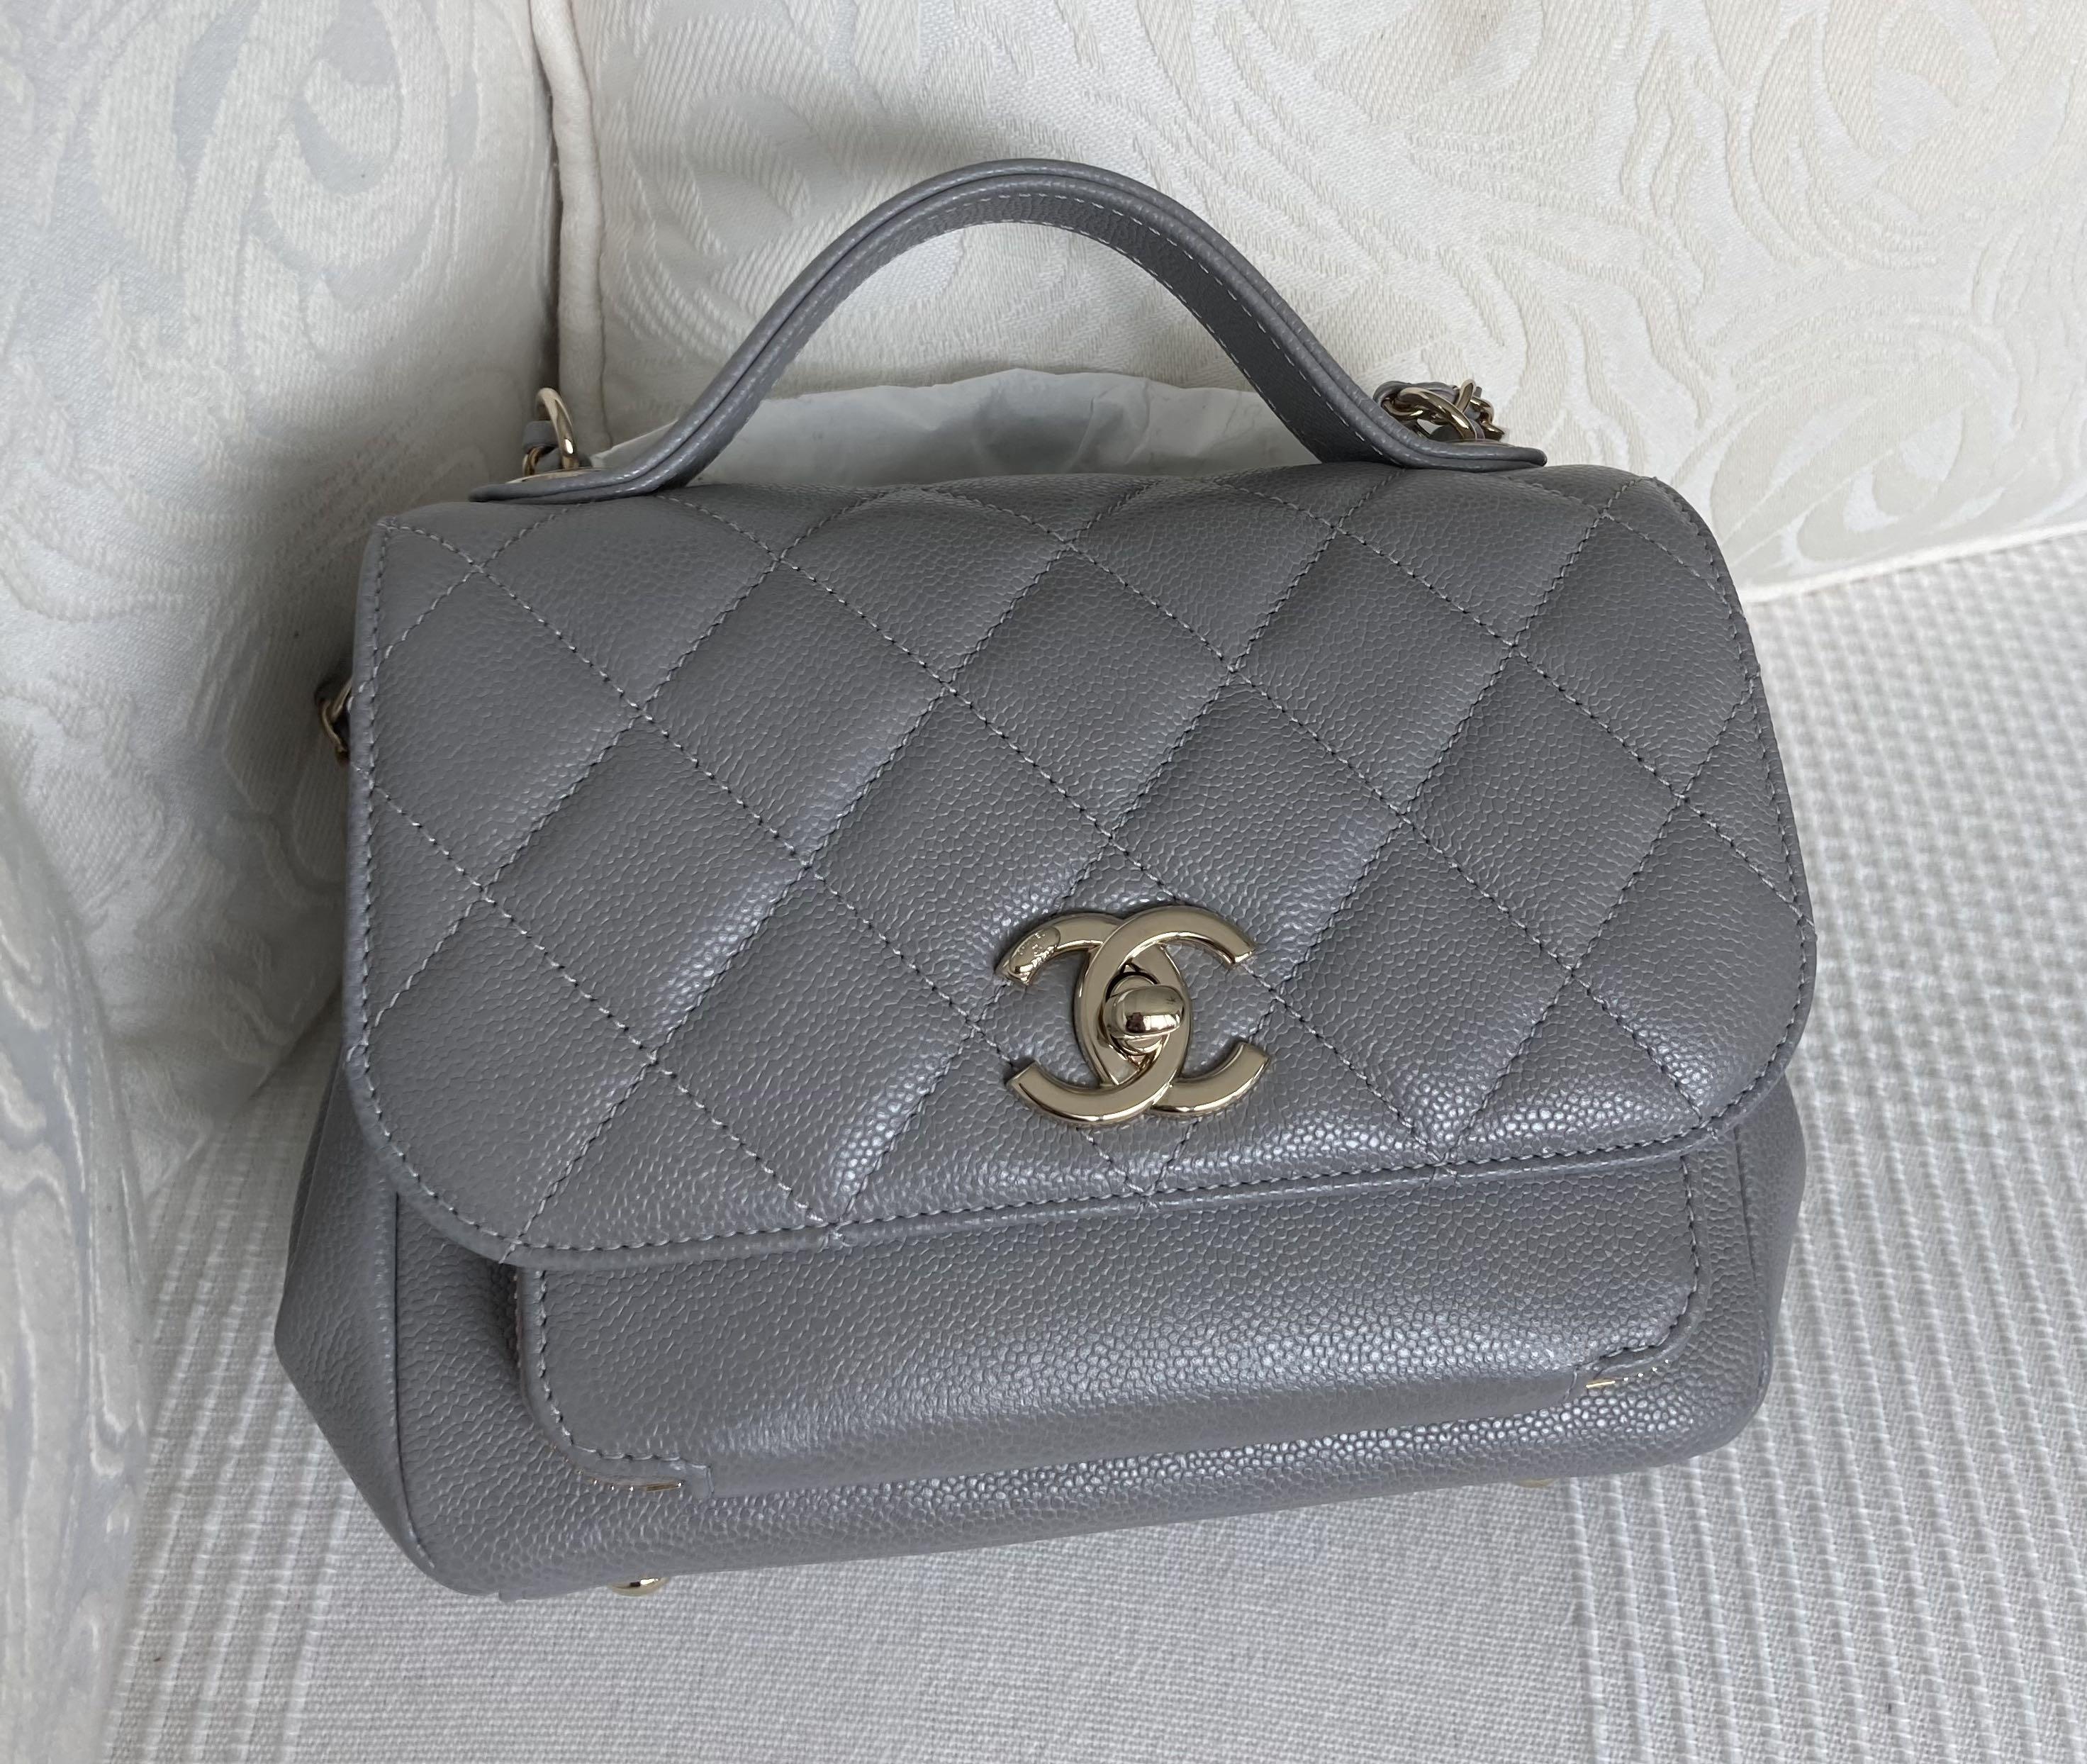 Chanel Business Affinity Light Grey, Women's Fashion, Bags